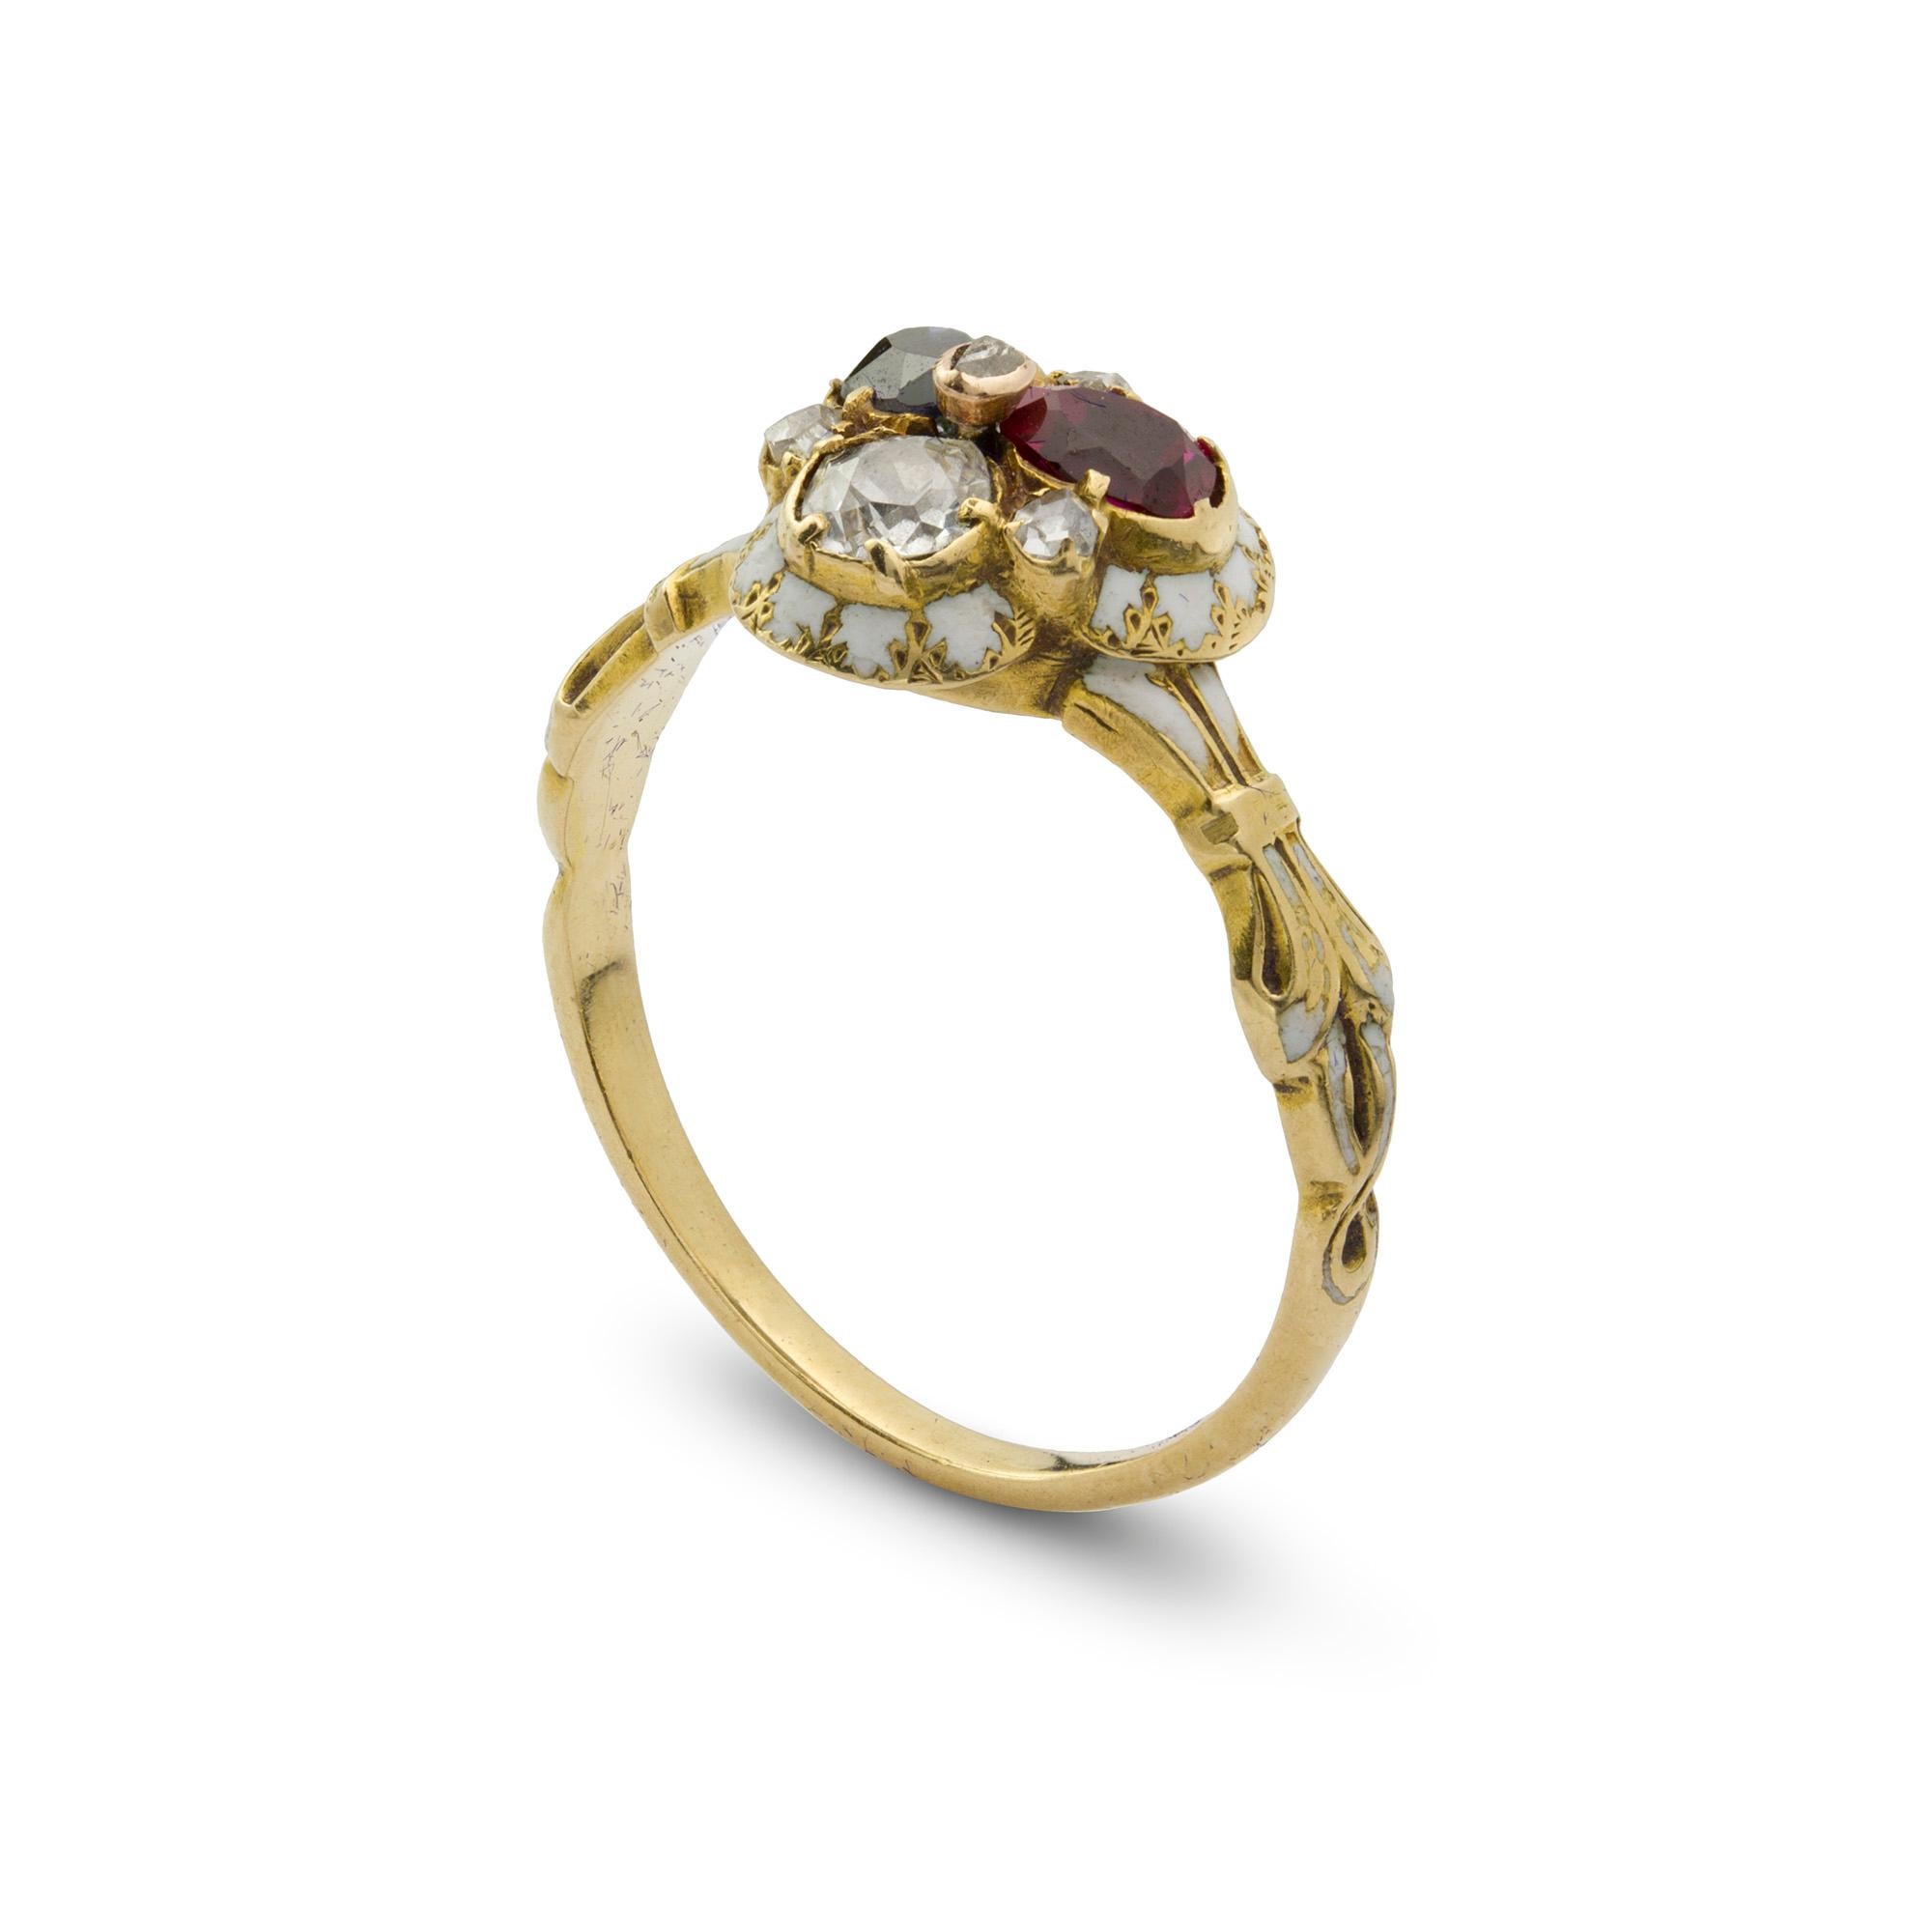 A late Georgian ruby, sapphire and diamond enamel ring, set to the centre ruby, sapphire and diamond set in a trefoil shape between four rose-cut diamonds in 18ct yellow gold to a white enamel and gold engraved border leading to decorative white